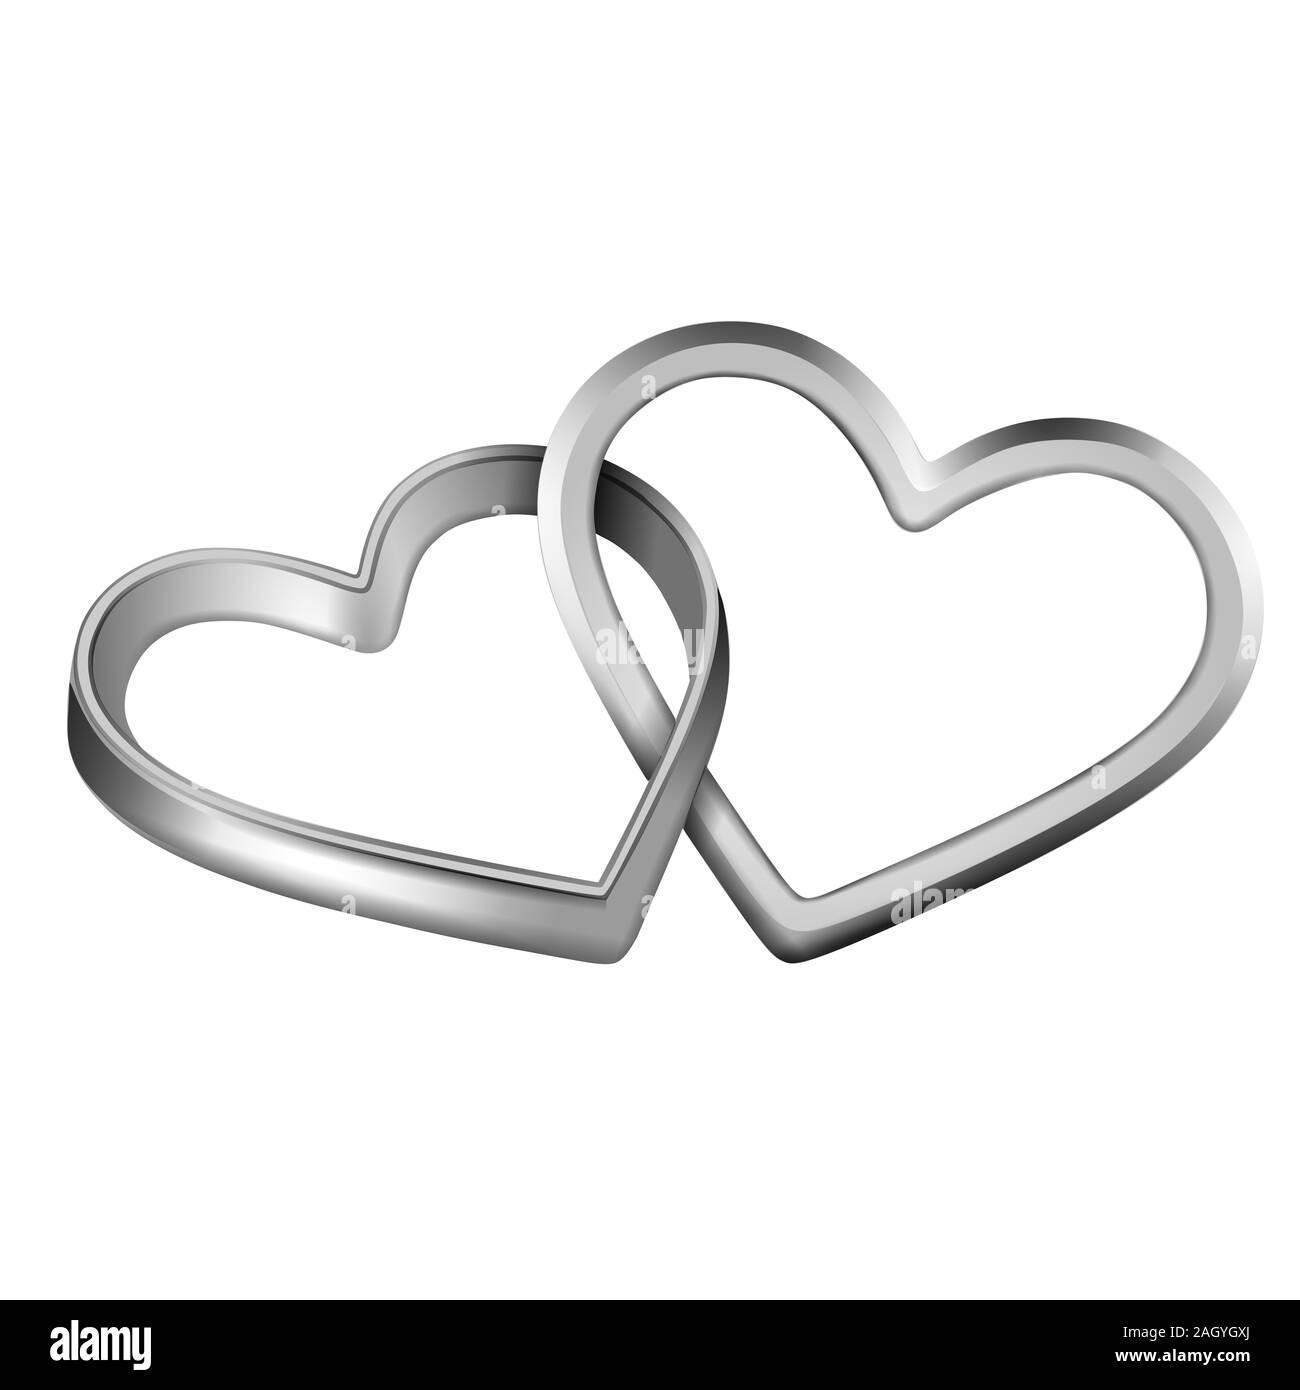 isolated intertwined heart shaped silver rings for wedding and valentine's day Stock Photo